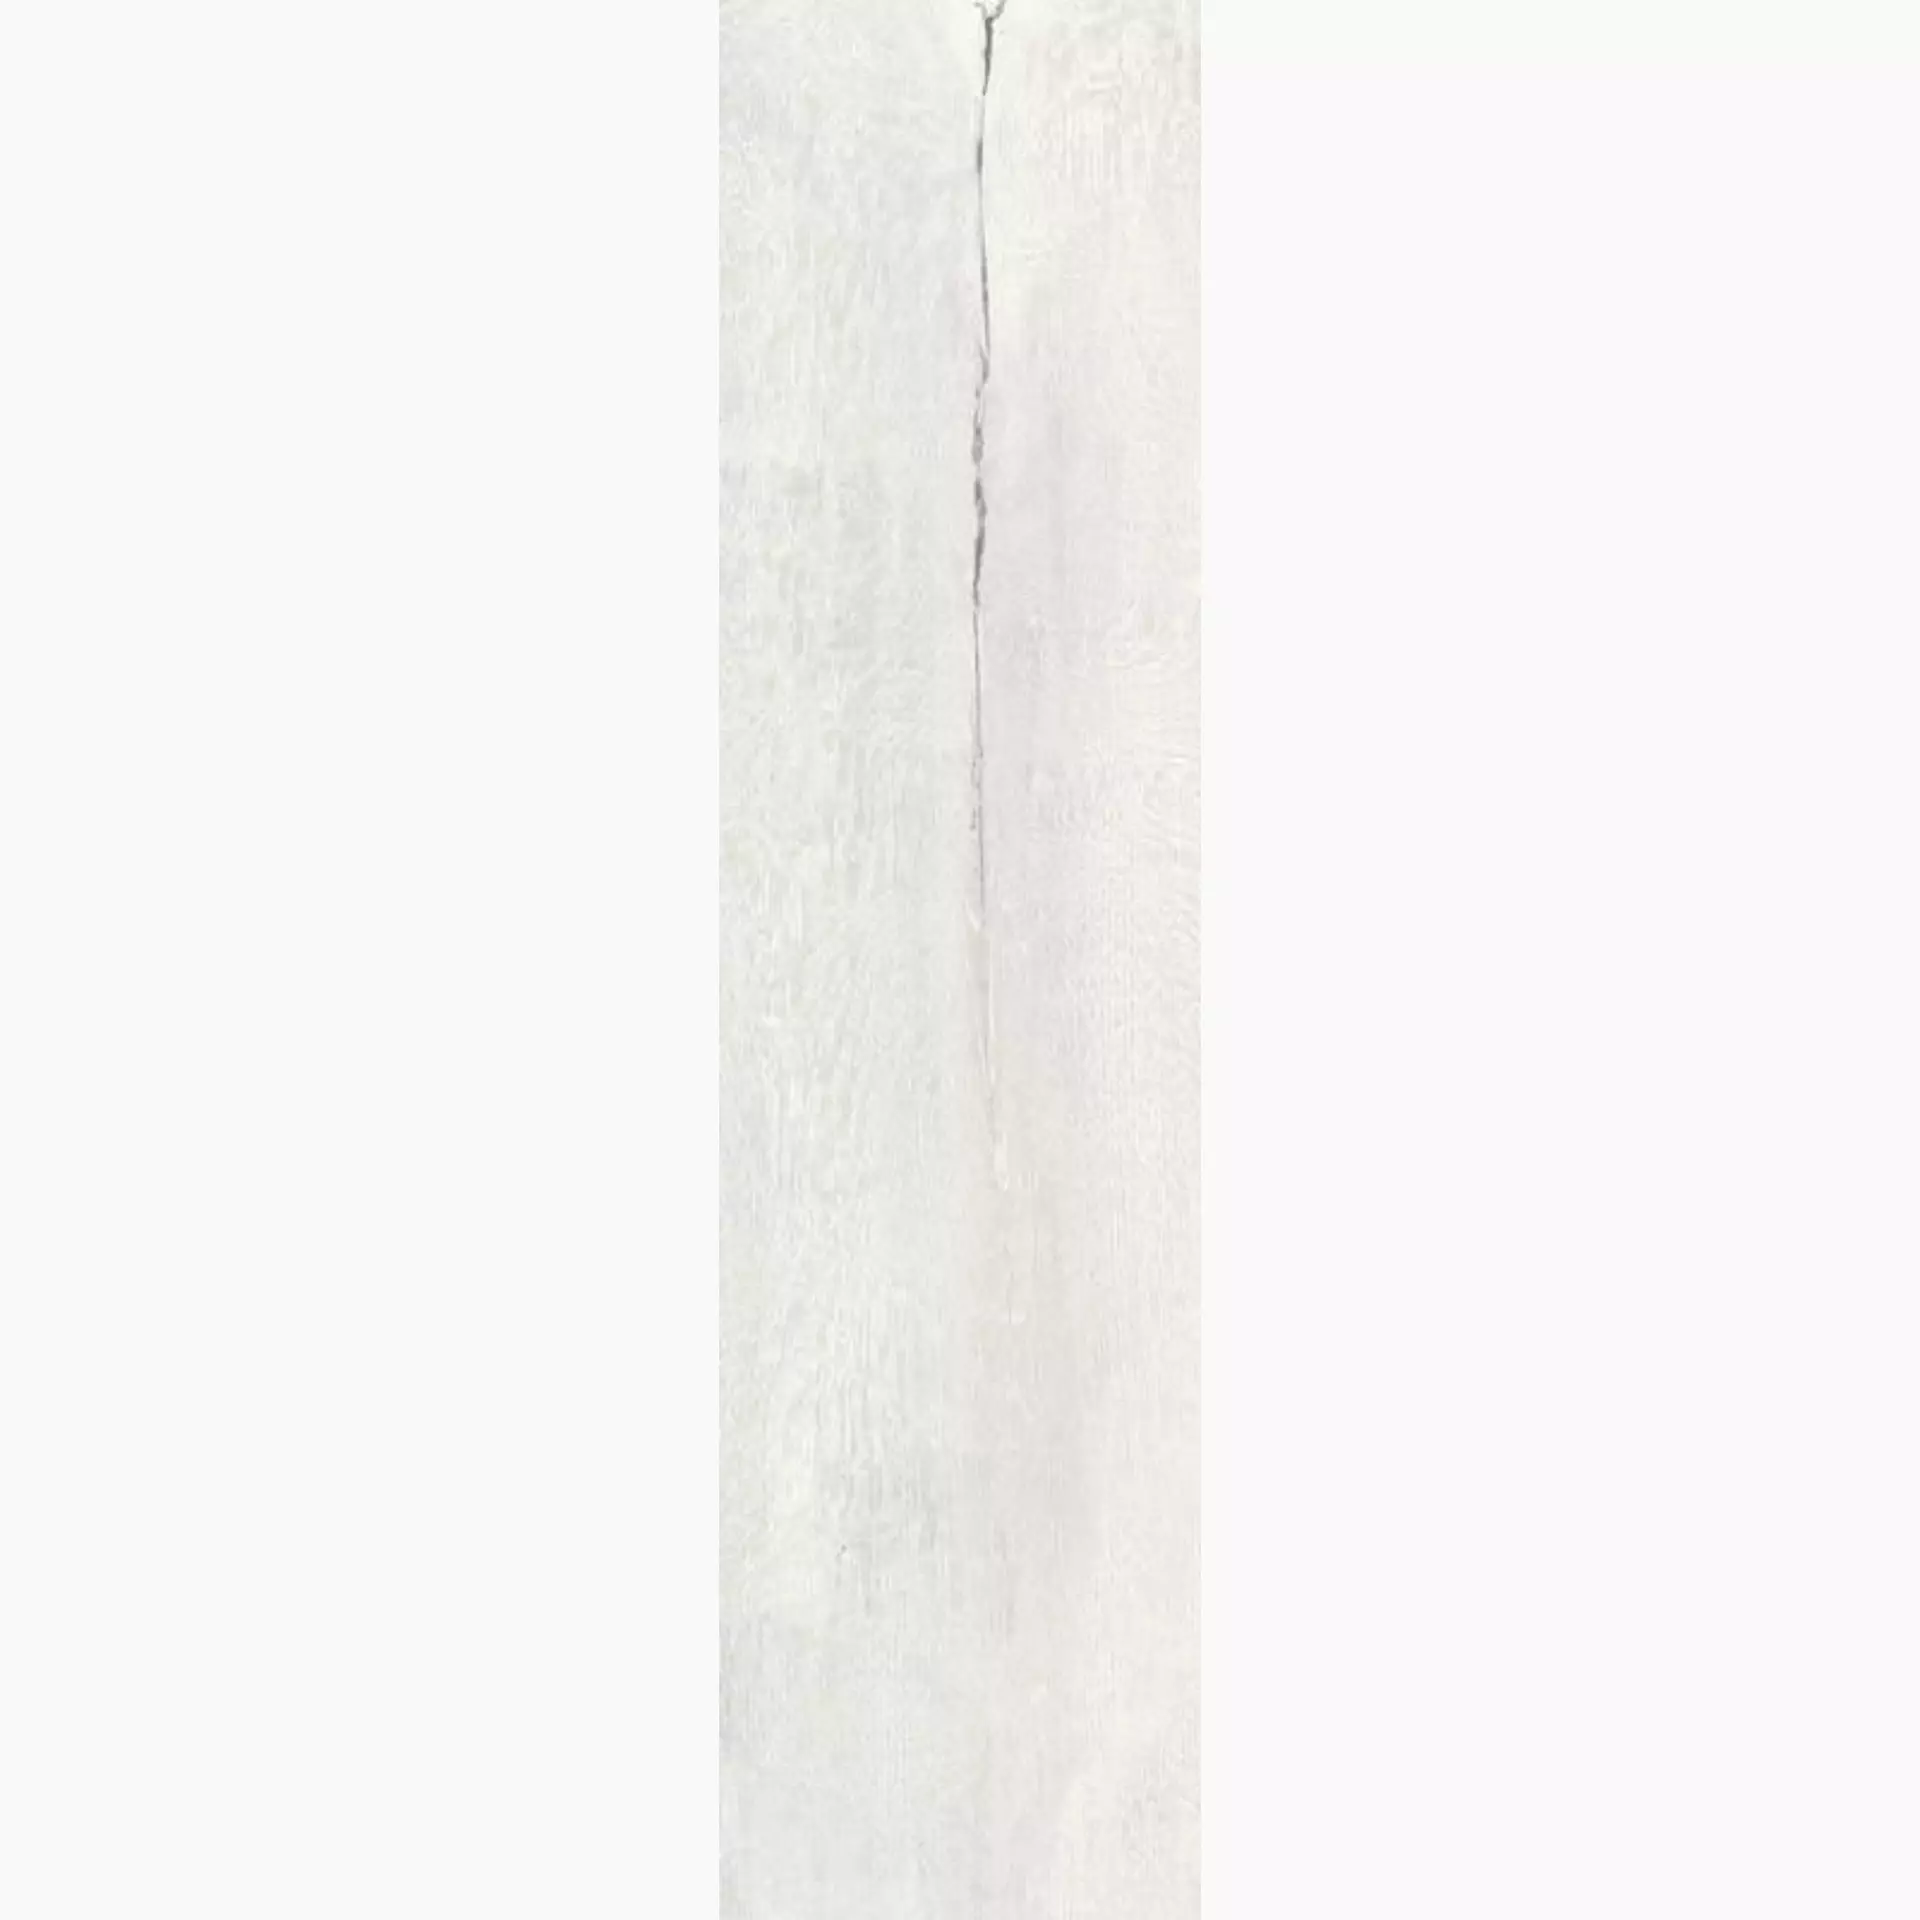 Sant Agostino Timewood White Natural CSATWWHE30 30x120cm rectified 10mm